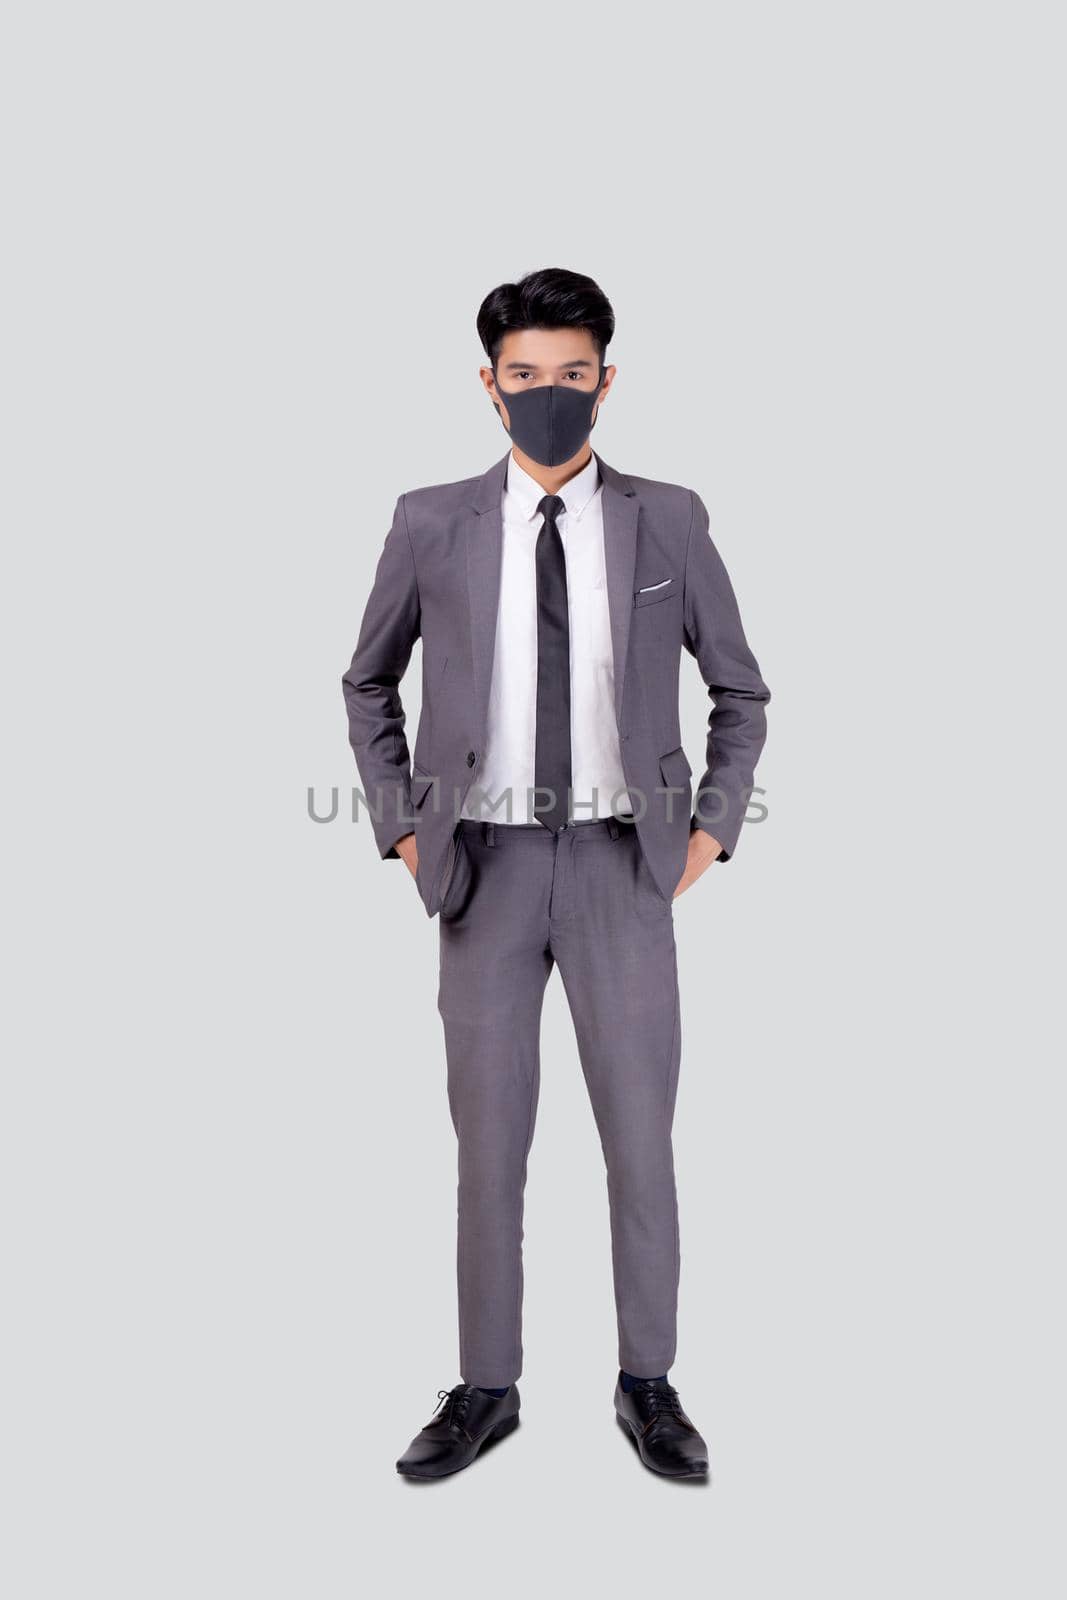 Portrait young asian businessman in suit wearing face mask for protective covid-19 isolated on white background, business man and healthcare, quarantine for pandemic coronavirus, new normal. by nnudoo